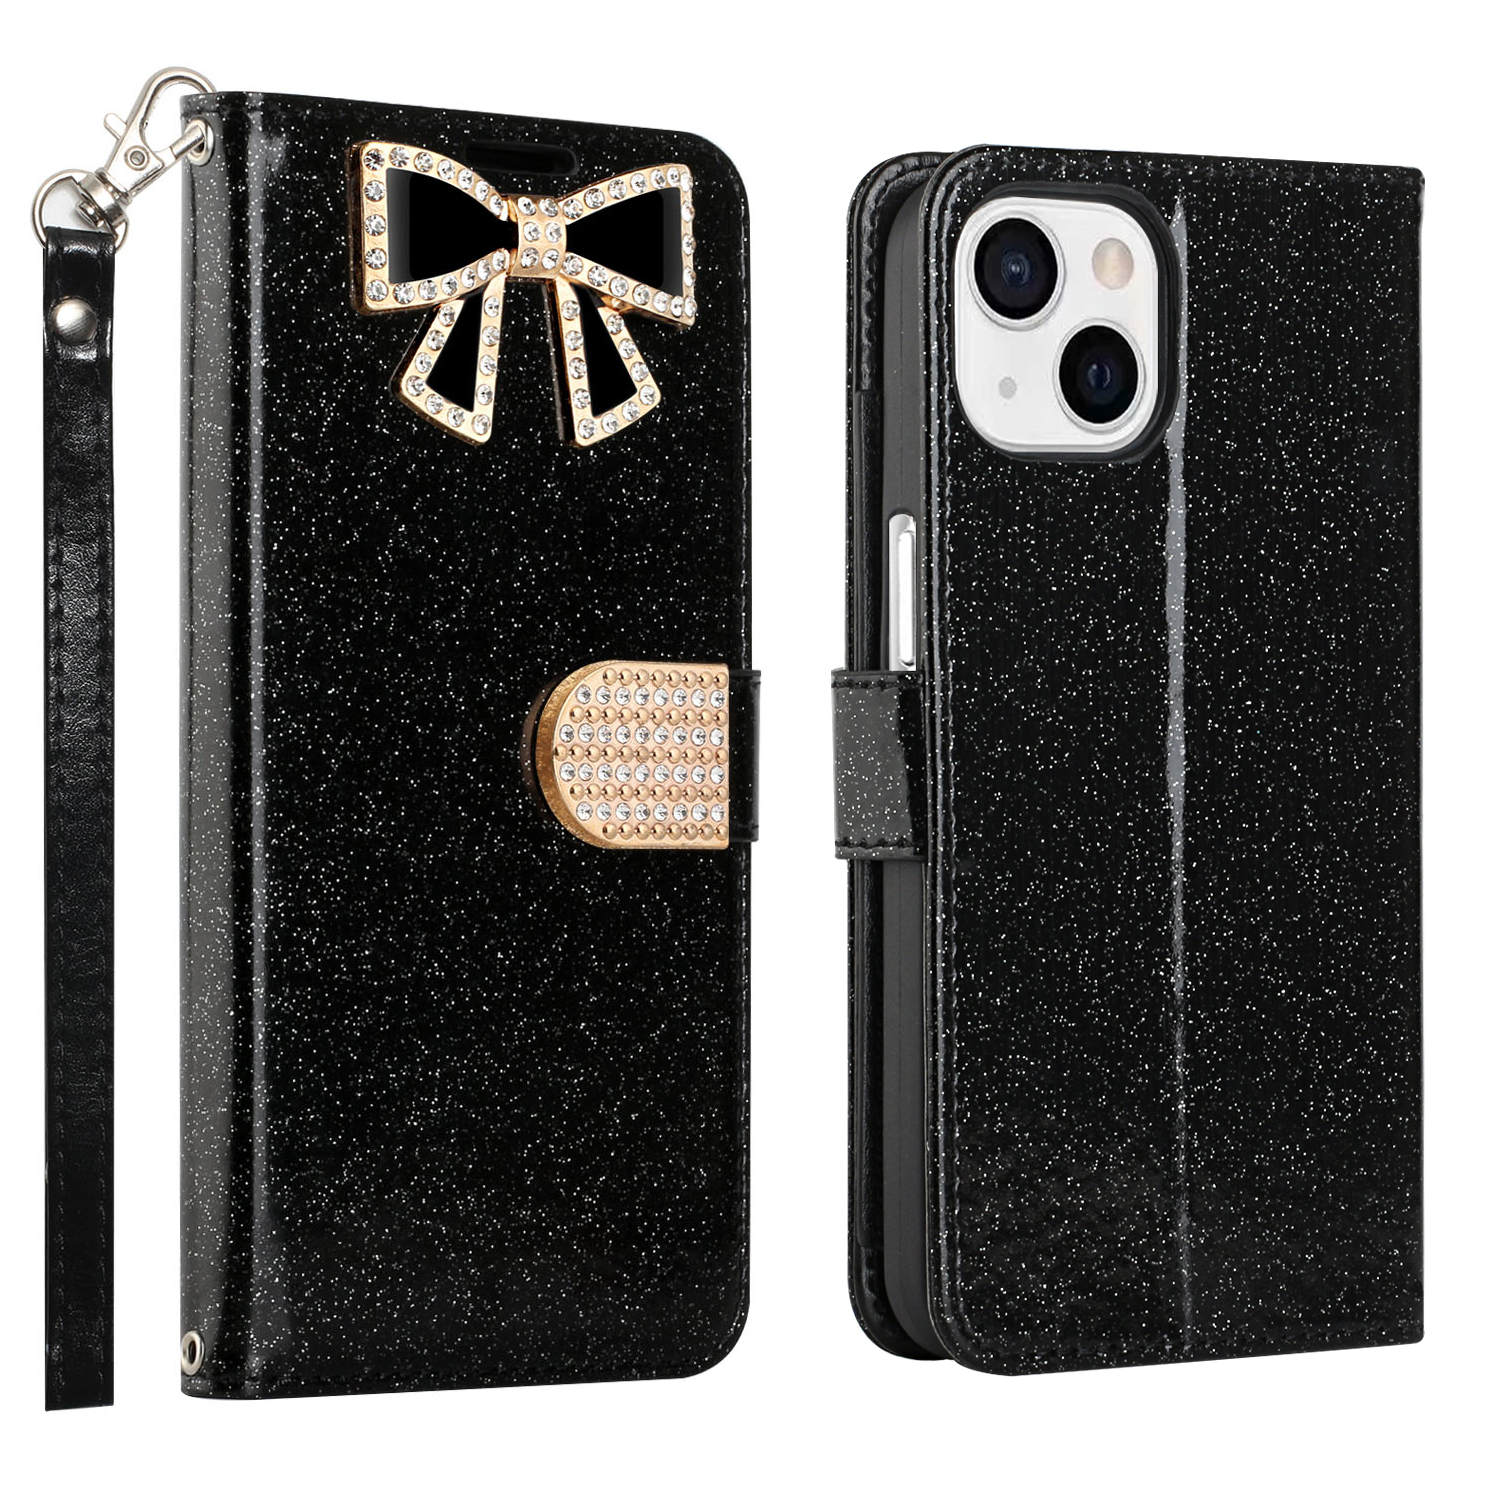 Ribbon Bow Crystal Diamond Flip BOOK Wallet Case for Apple iPhone 13 [6.1] (Black)